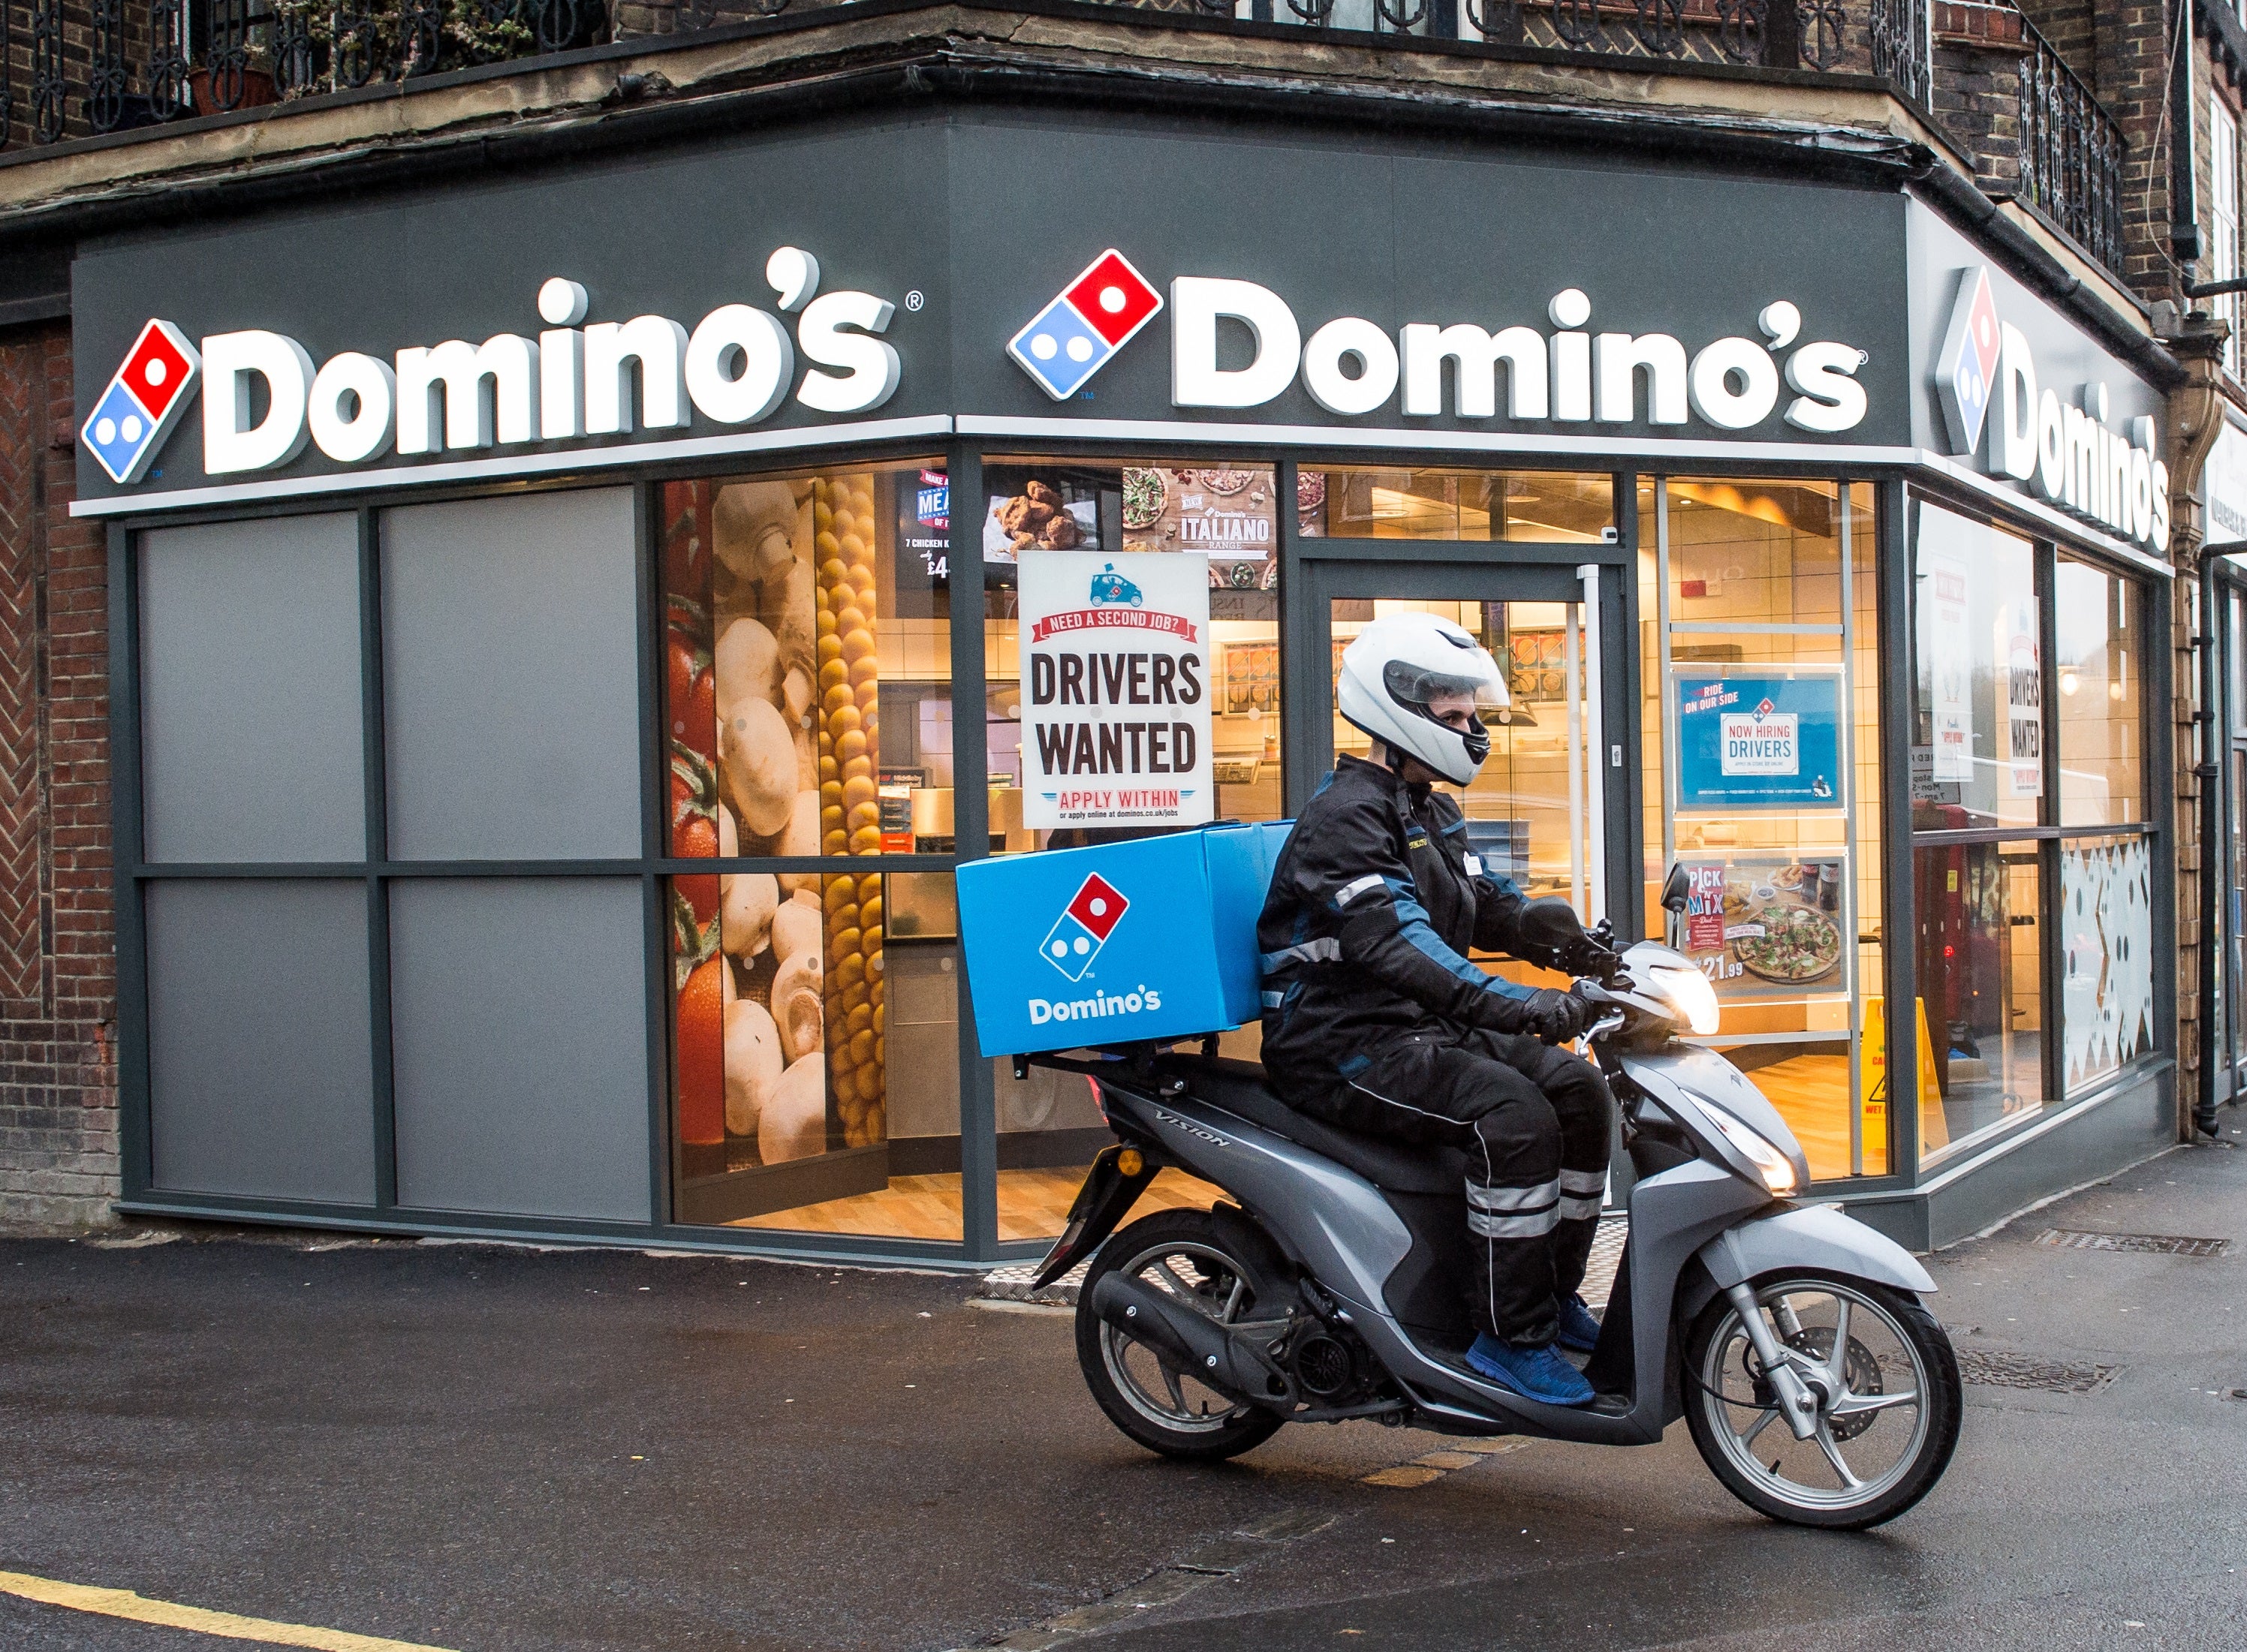 Domino’s Pizza said it expects sales growth to ramp up in 2022 despite inflation and recruitment woes (Domino’s/PA)